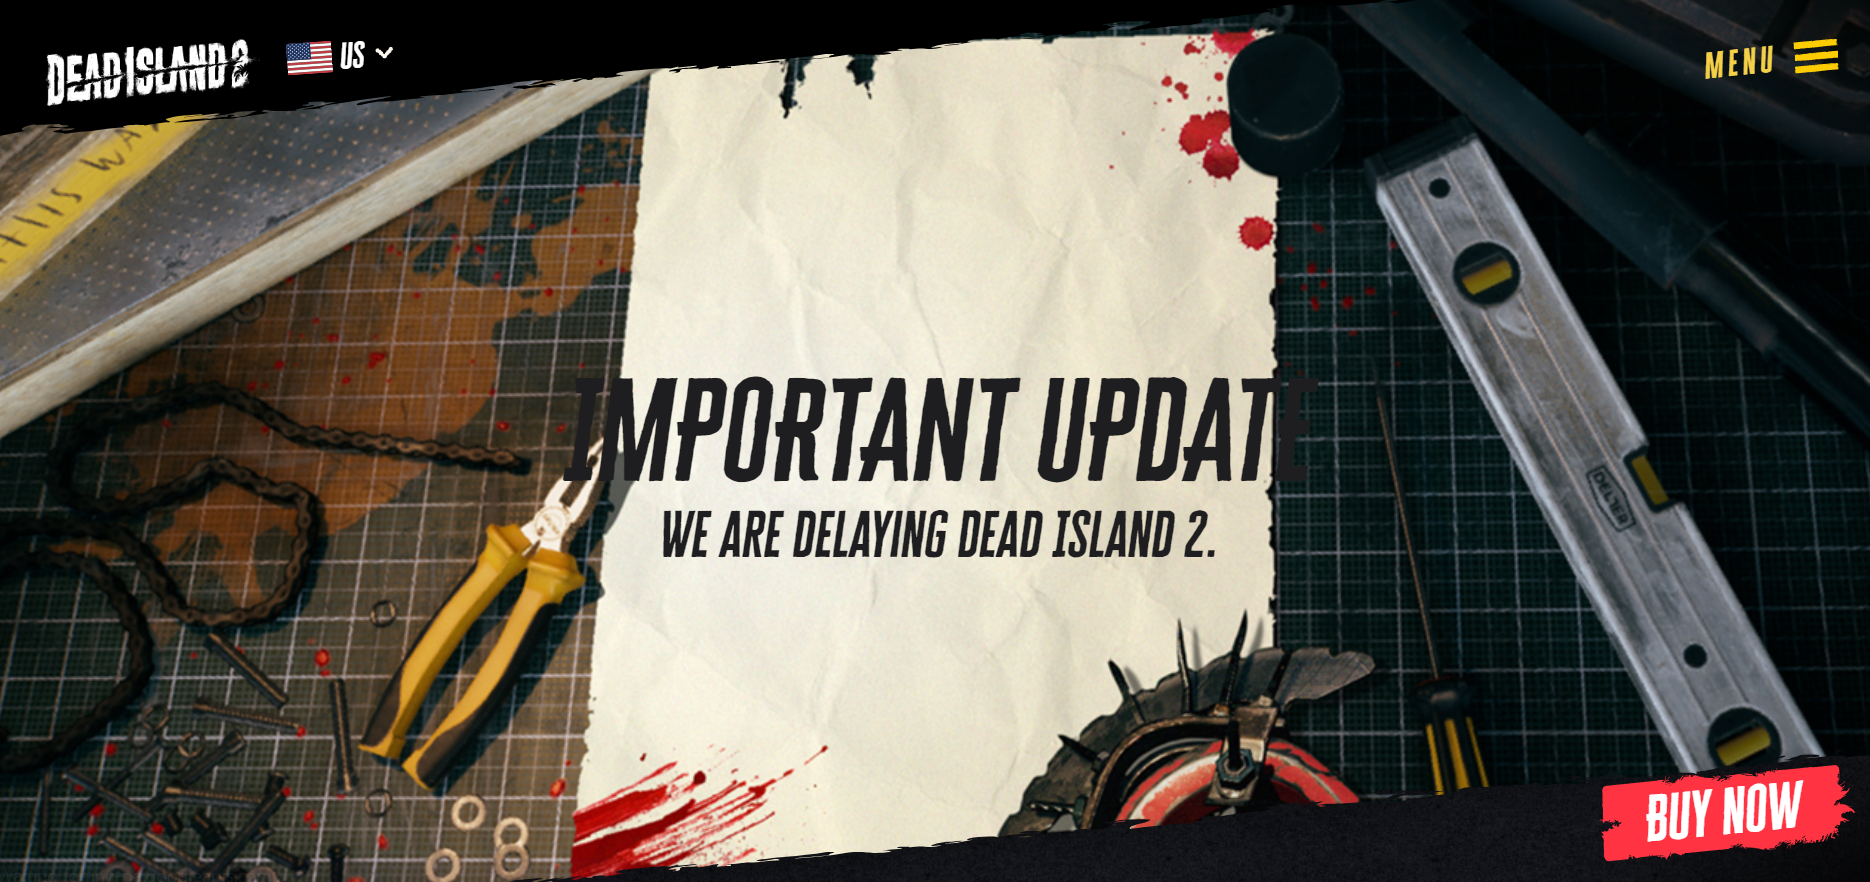 Update Dead Island 2 from the official website